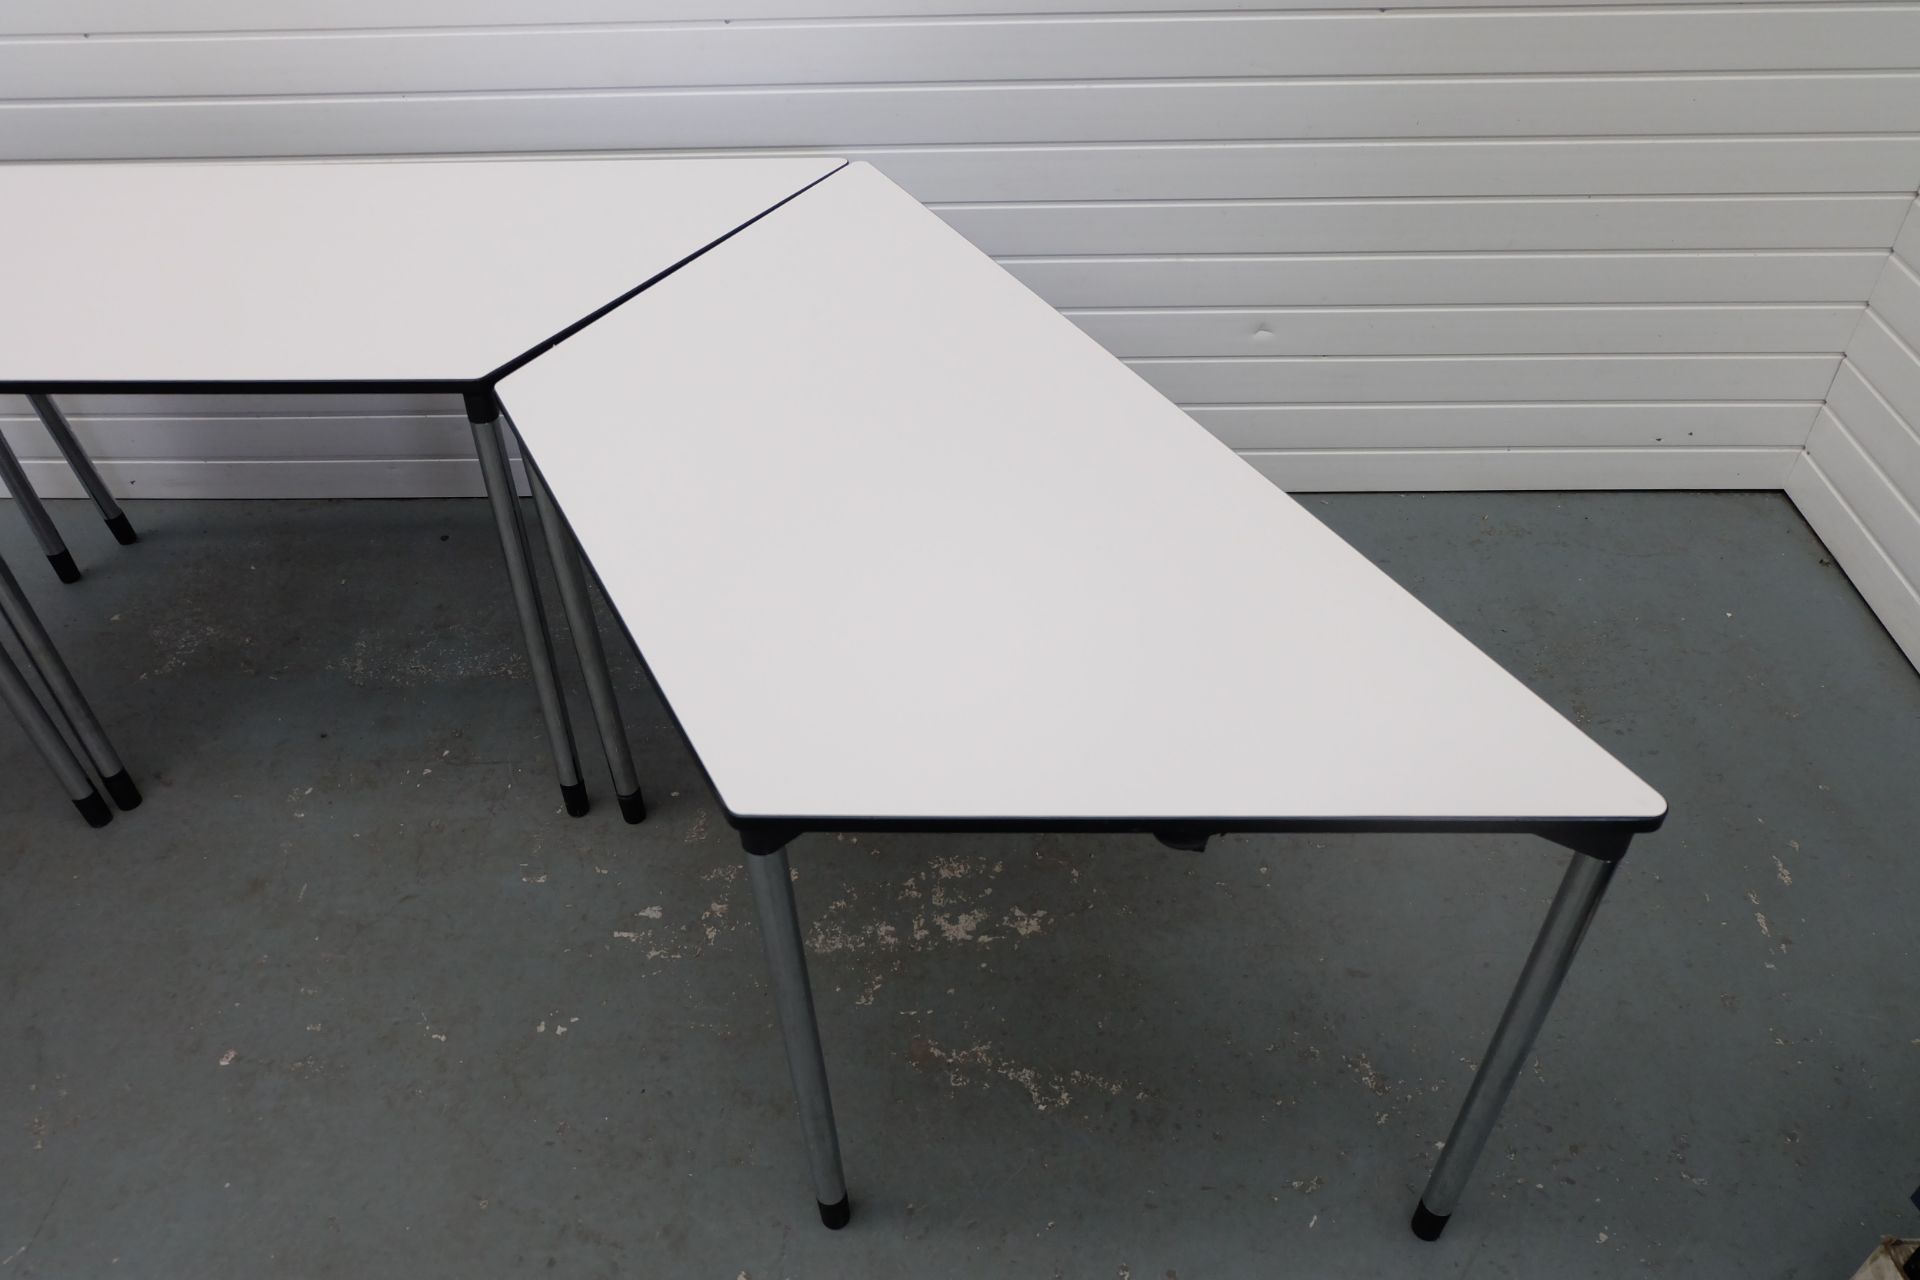 3 x Trapeziod Shape Desks With Metal Legs. Size 1470mm x 650mm x 750mm High. - Image 4 of 4